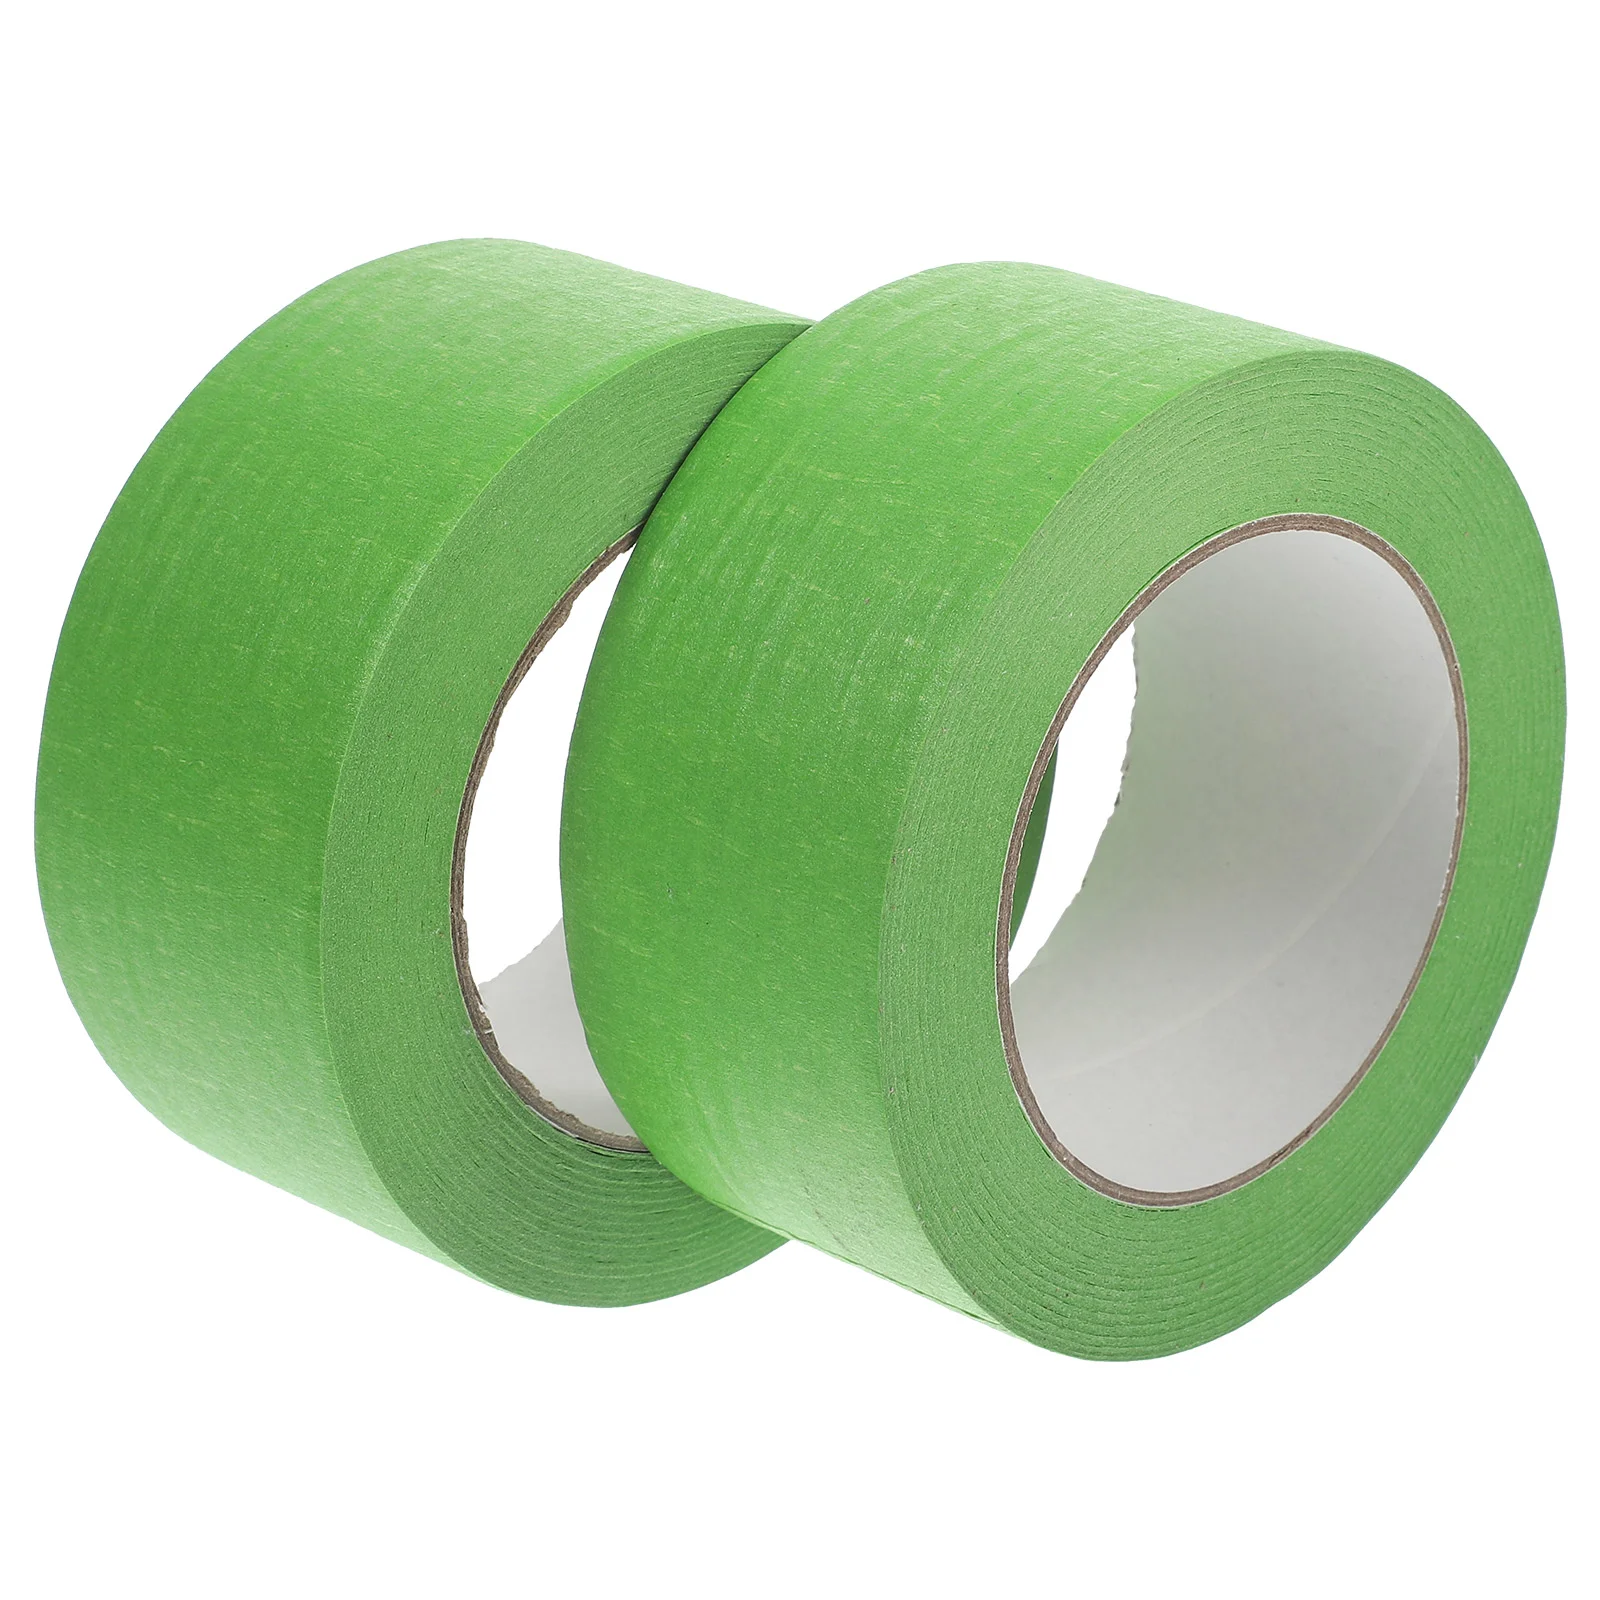 

2 Rolls Masking Tape Art+supplies Painting Tapes Painters for DIY Crafts Car Stuff Crepe Paper Artist